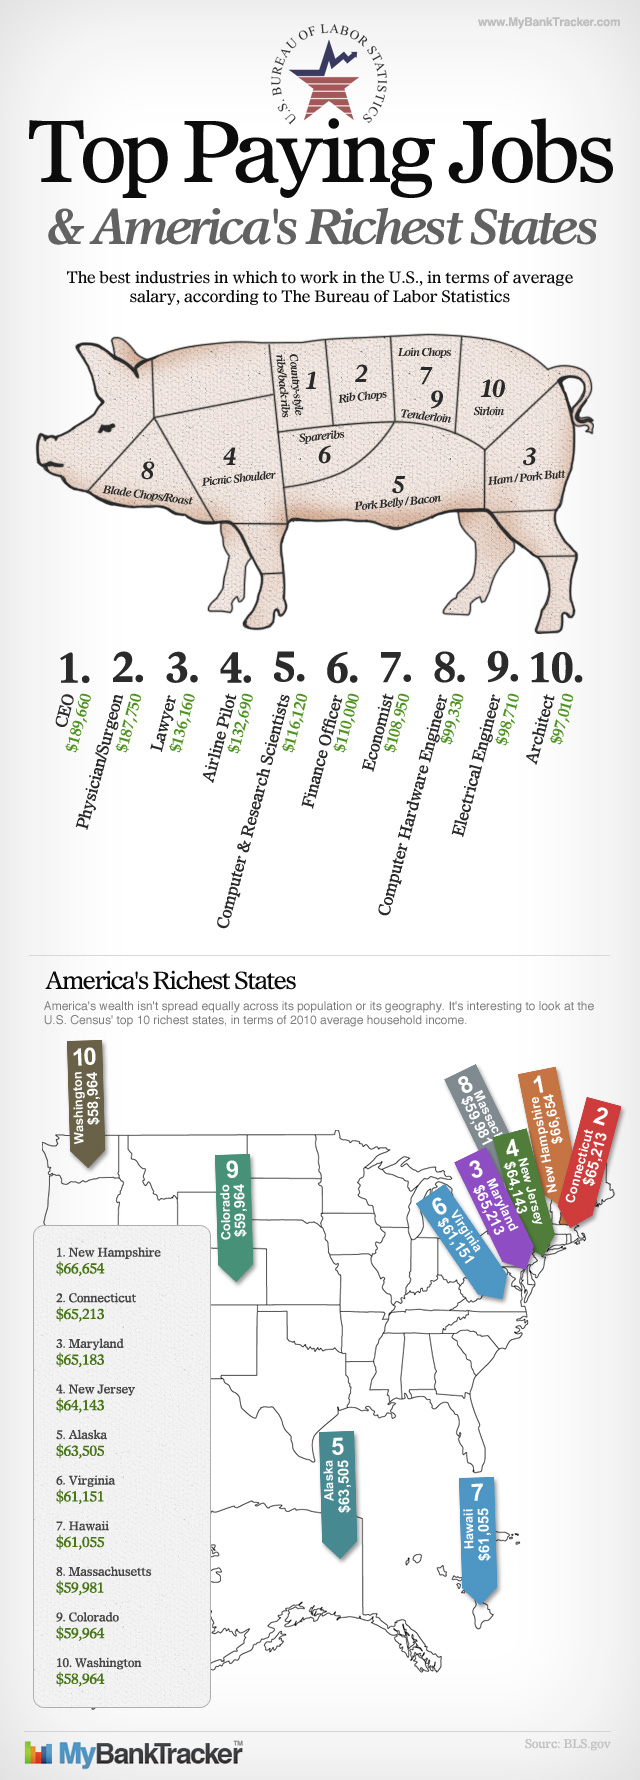 The Top Paying Jobs and Richest States in the U.S. | MyBankTracker